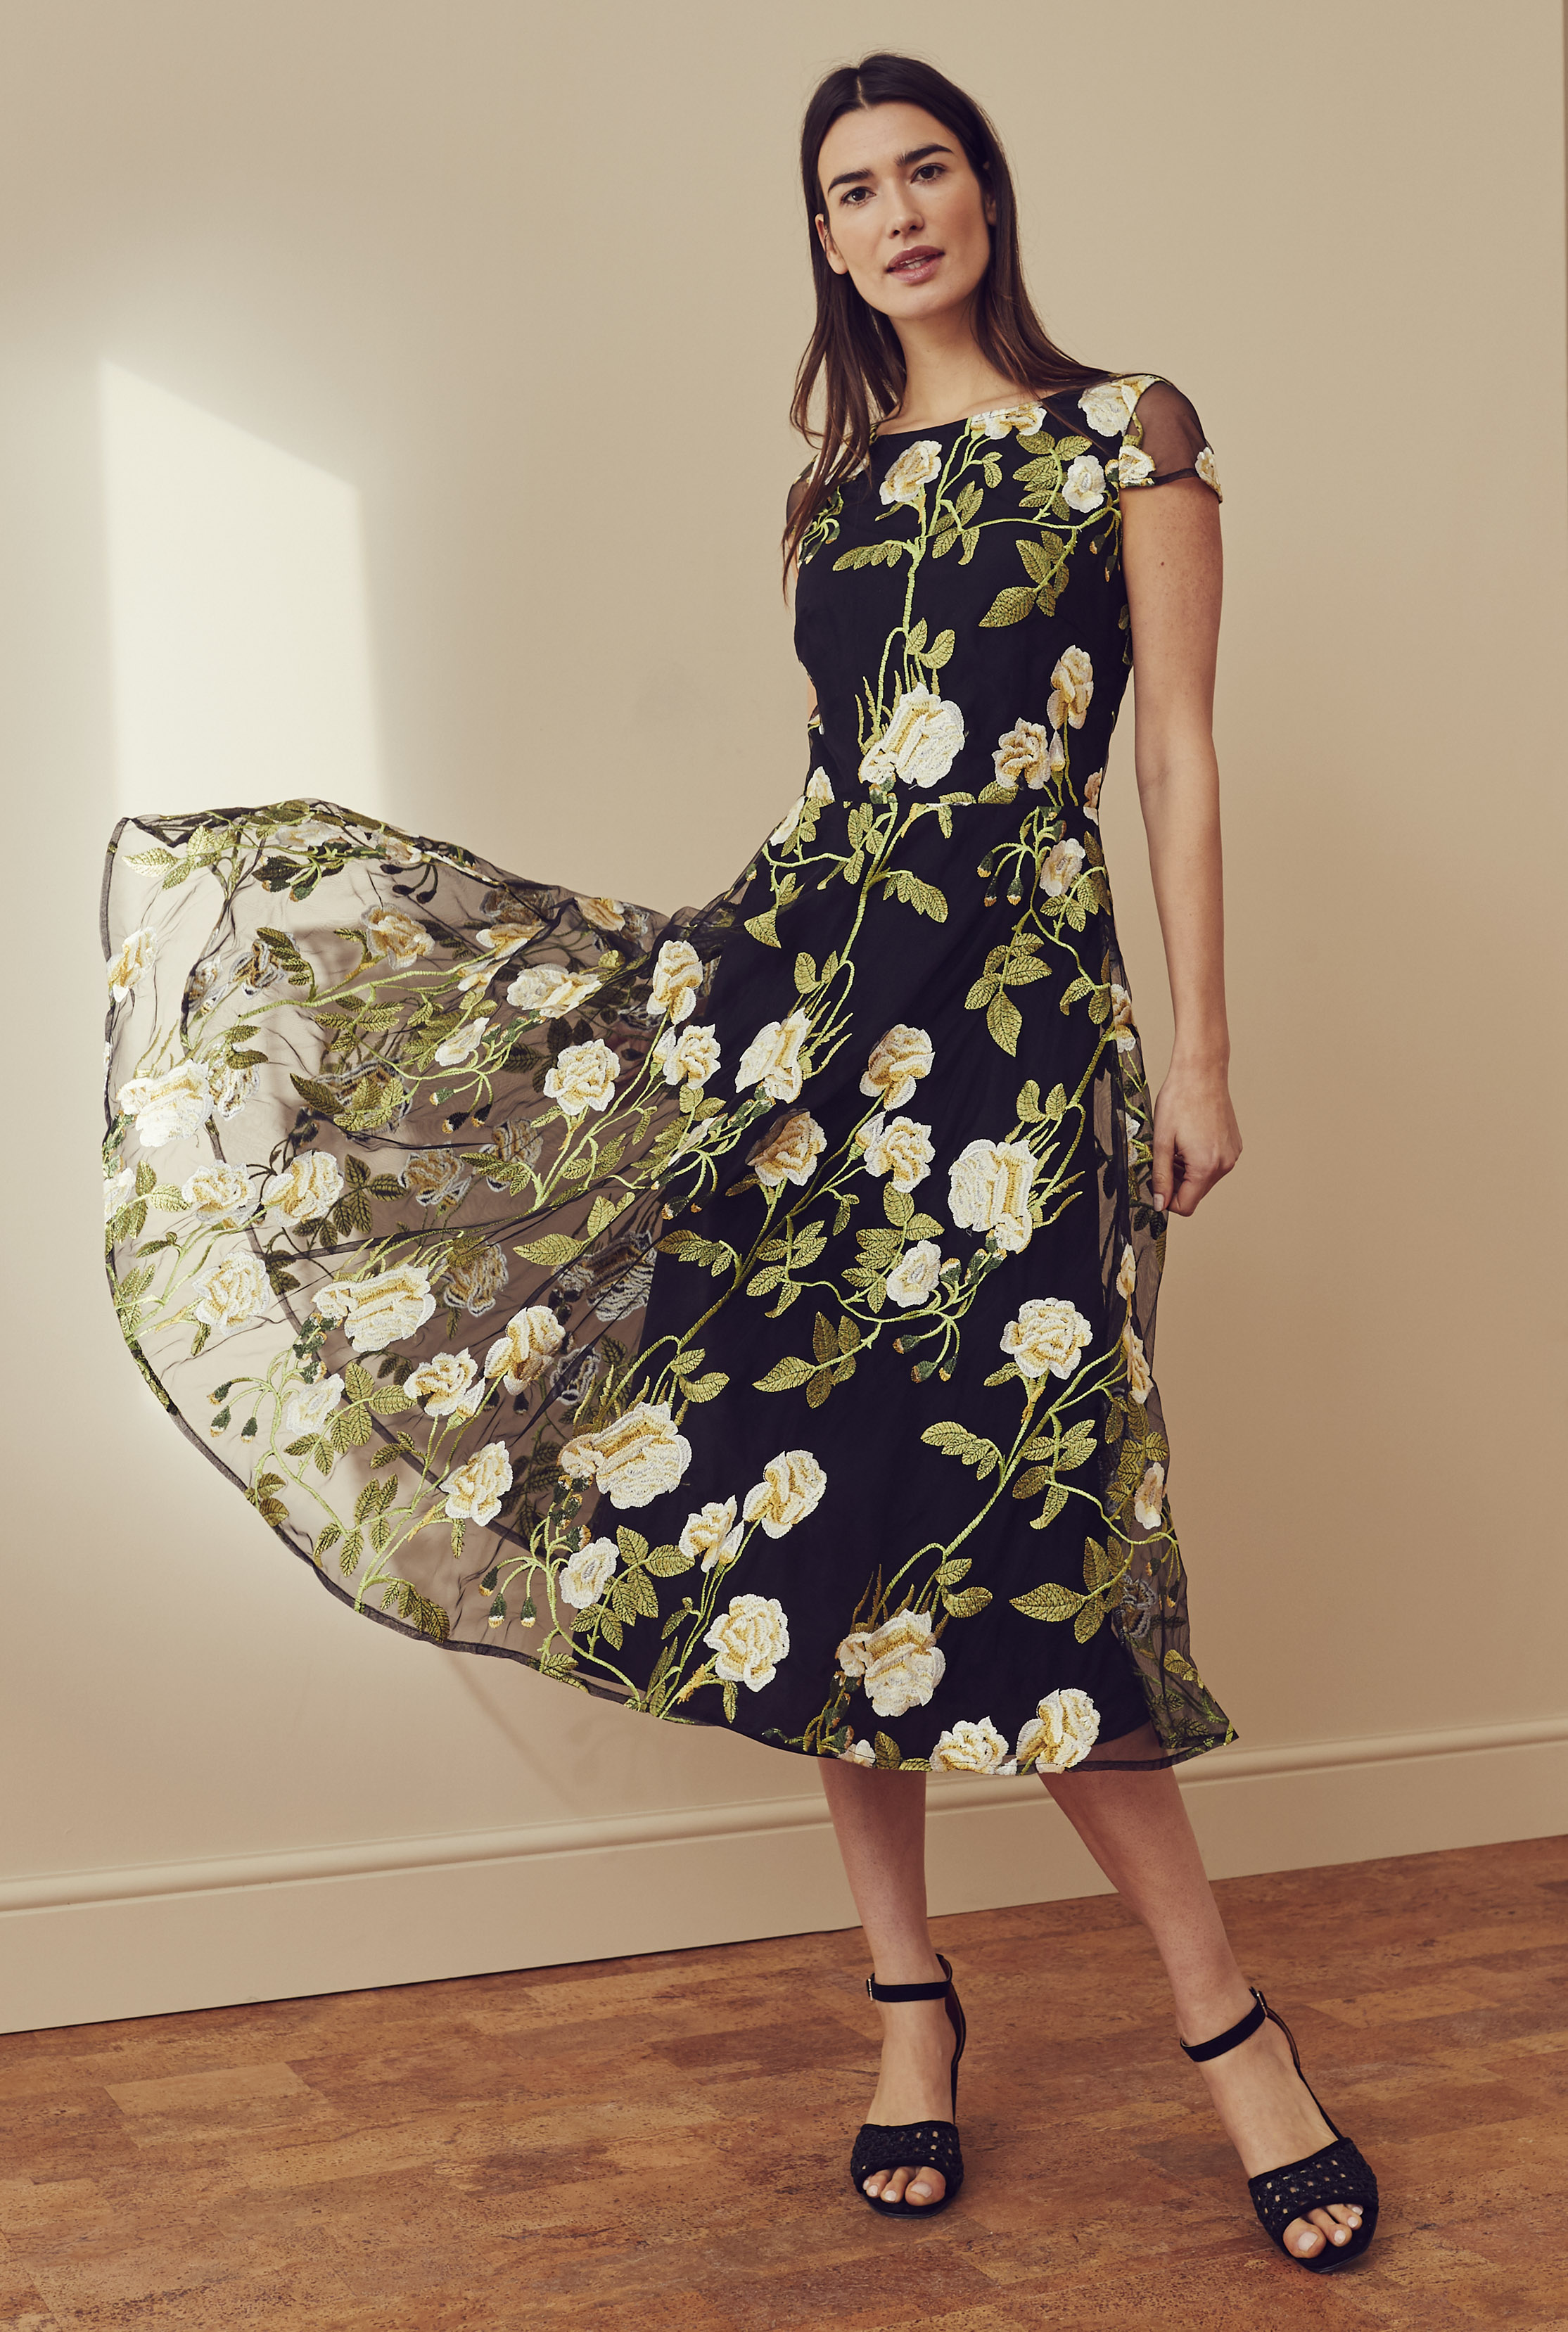 Black Floral Embroidered Occasion Dress Long Tall Sally